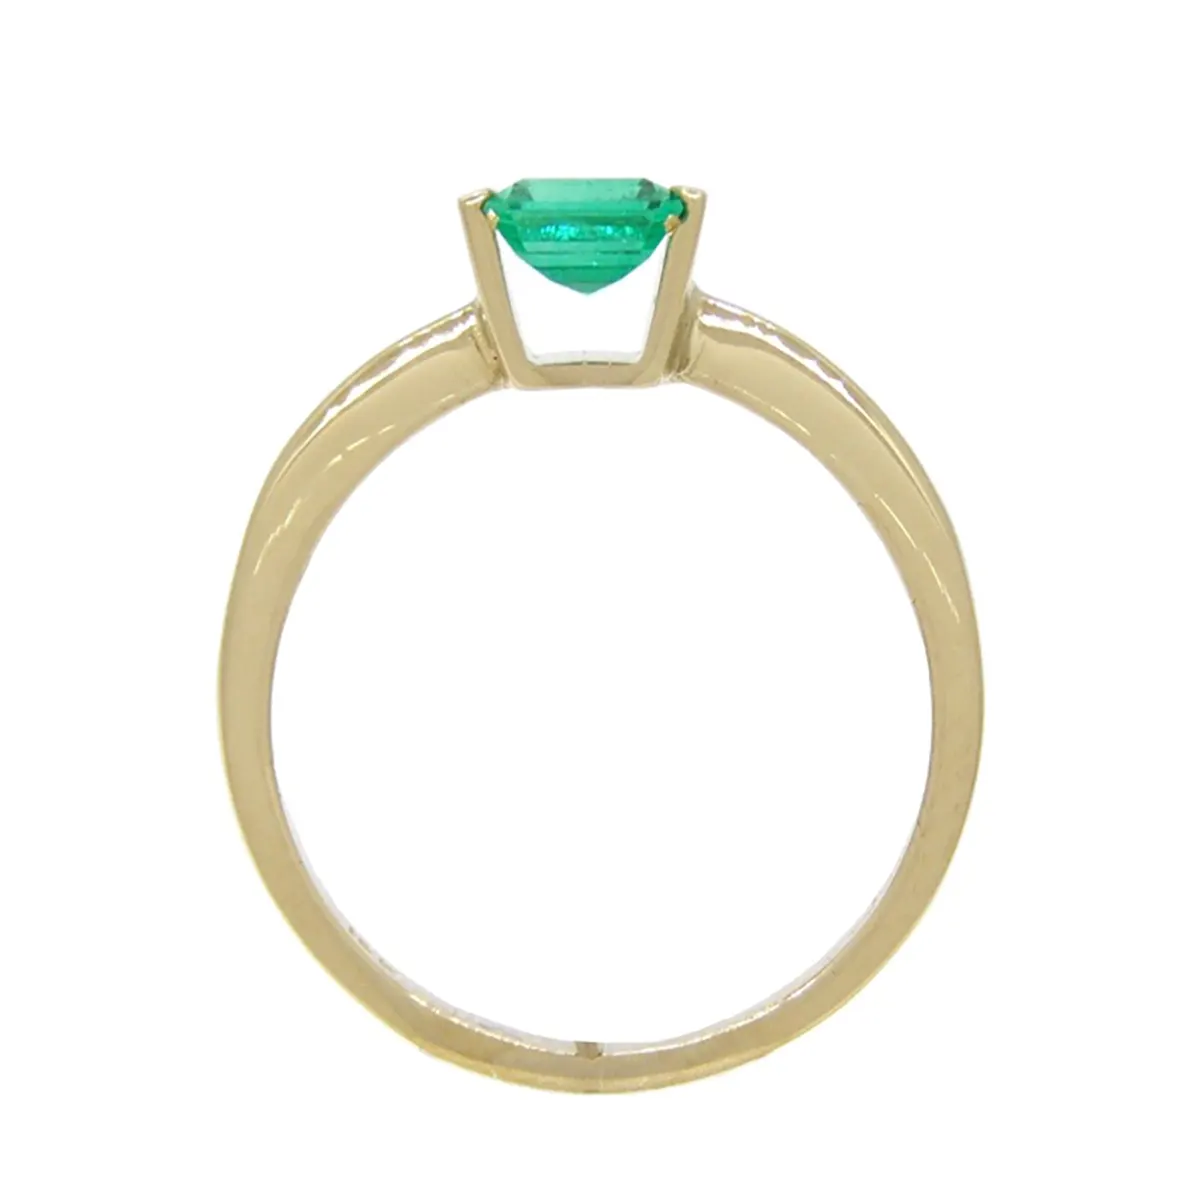 Emerald Cut Emerald Solitaire Ring in 18K Yellow Gold Tension Setting Ring Style